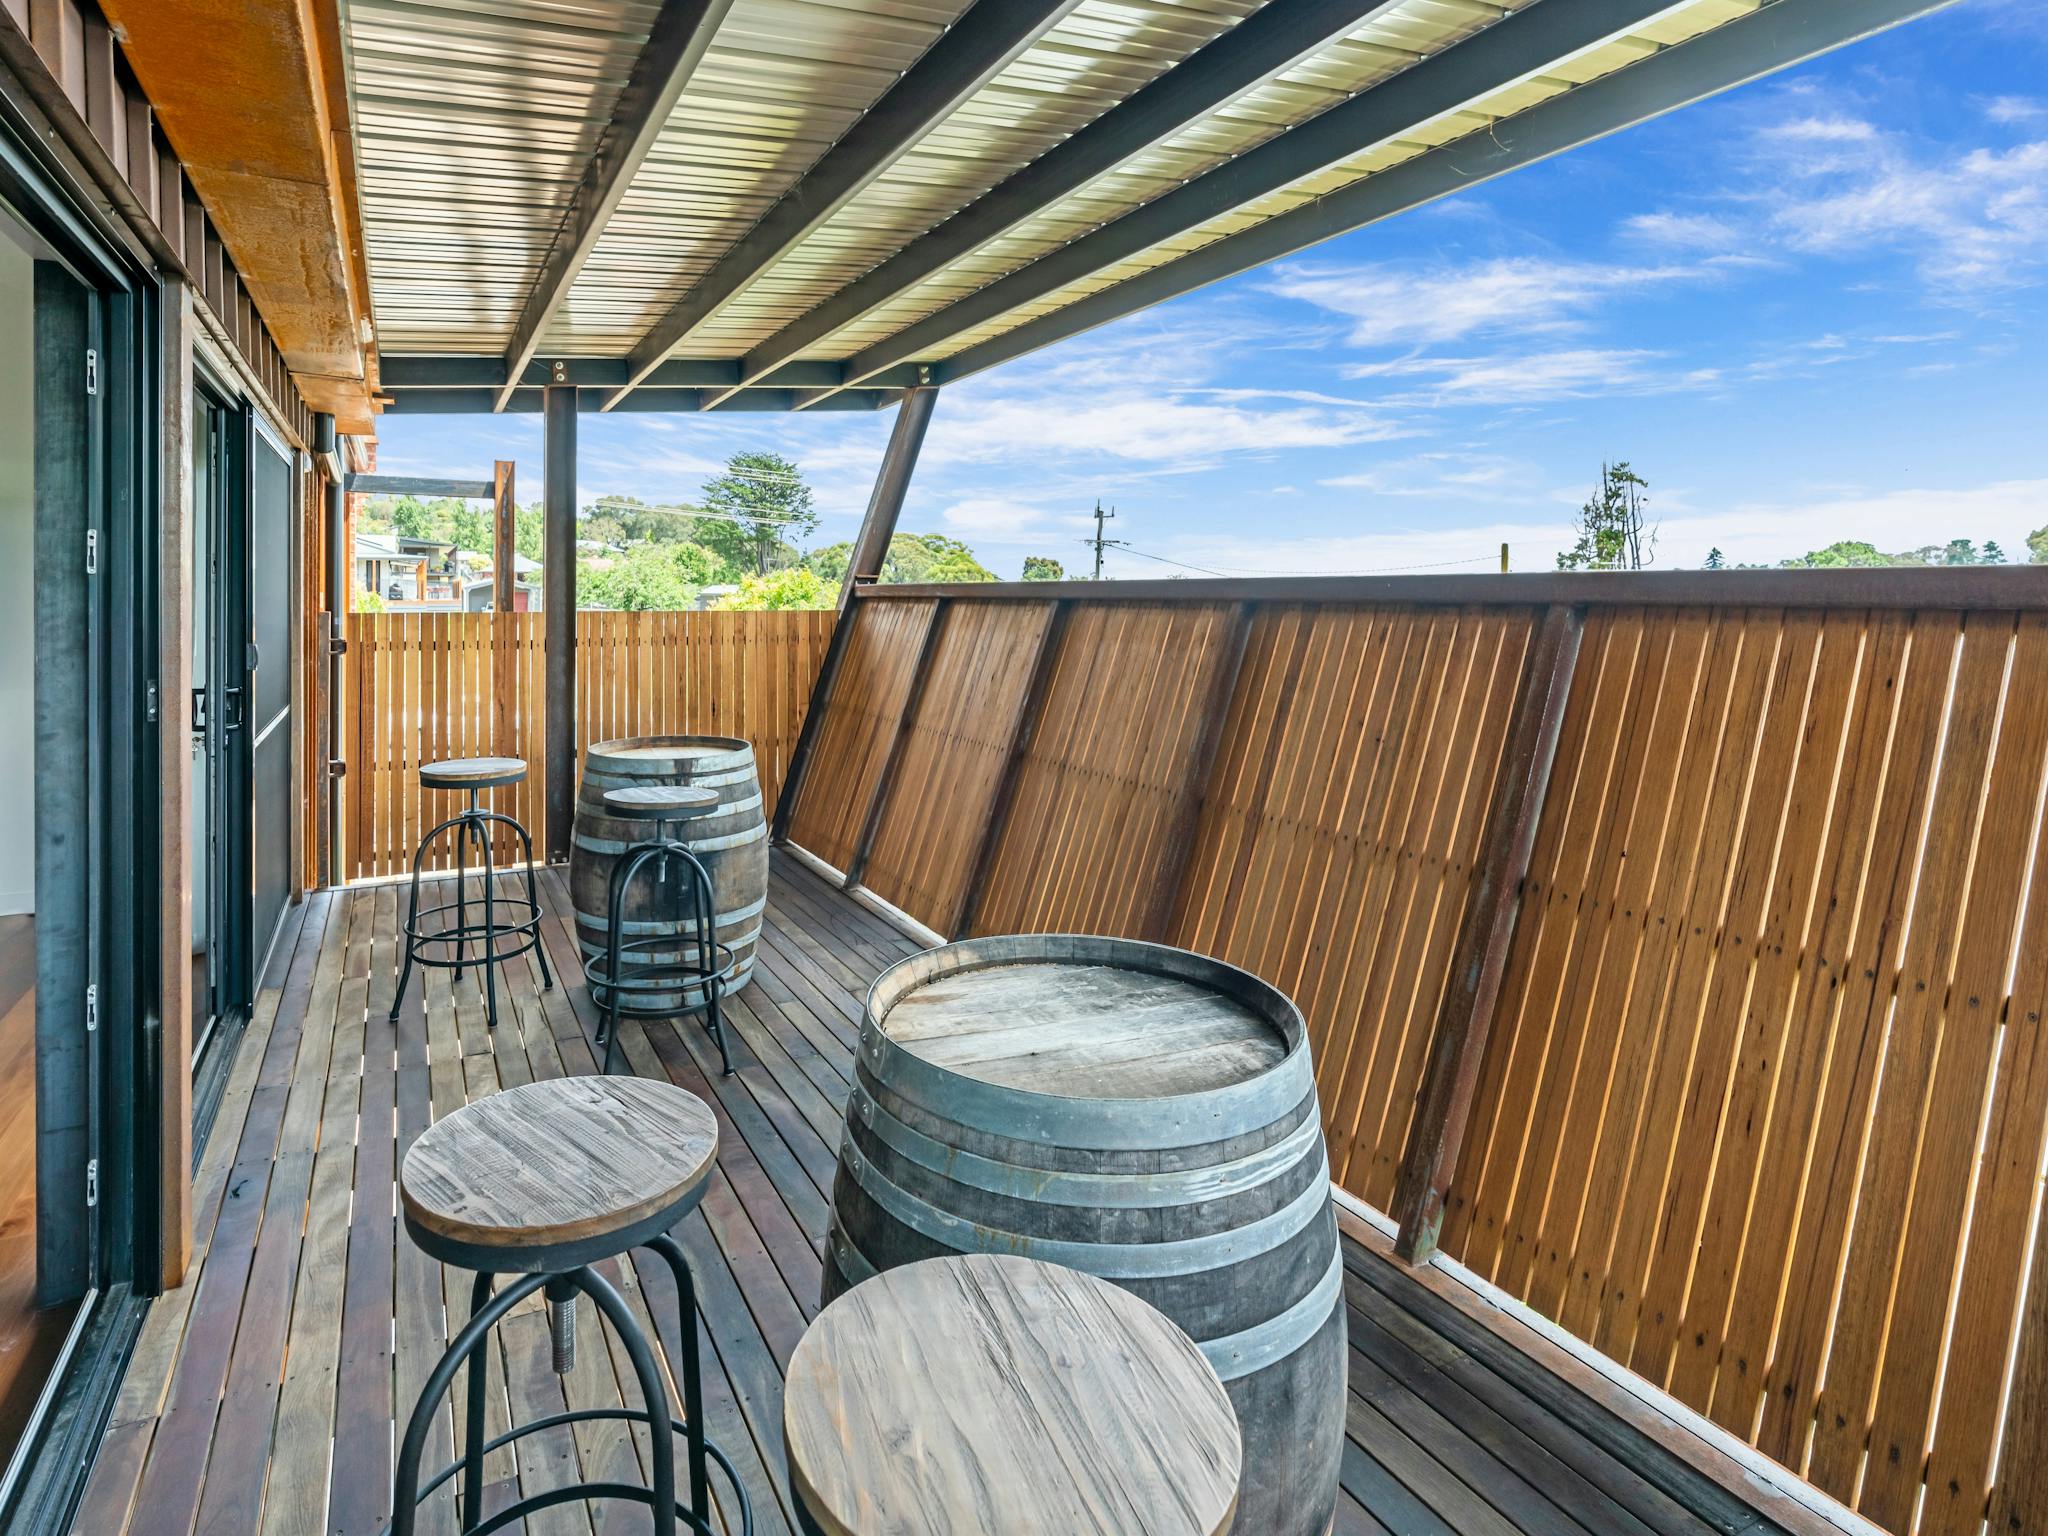 Upstairs balcony with local wine barrels and stools with a view over picturesque Beechworth